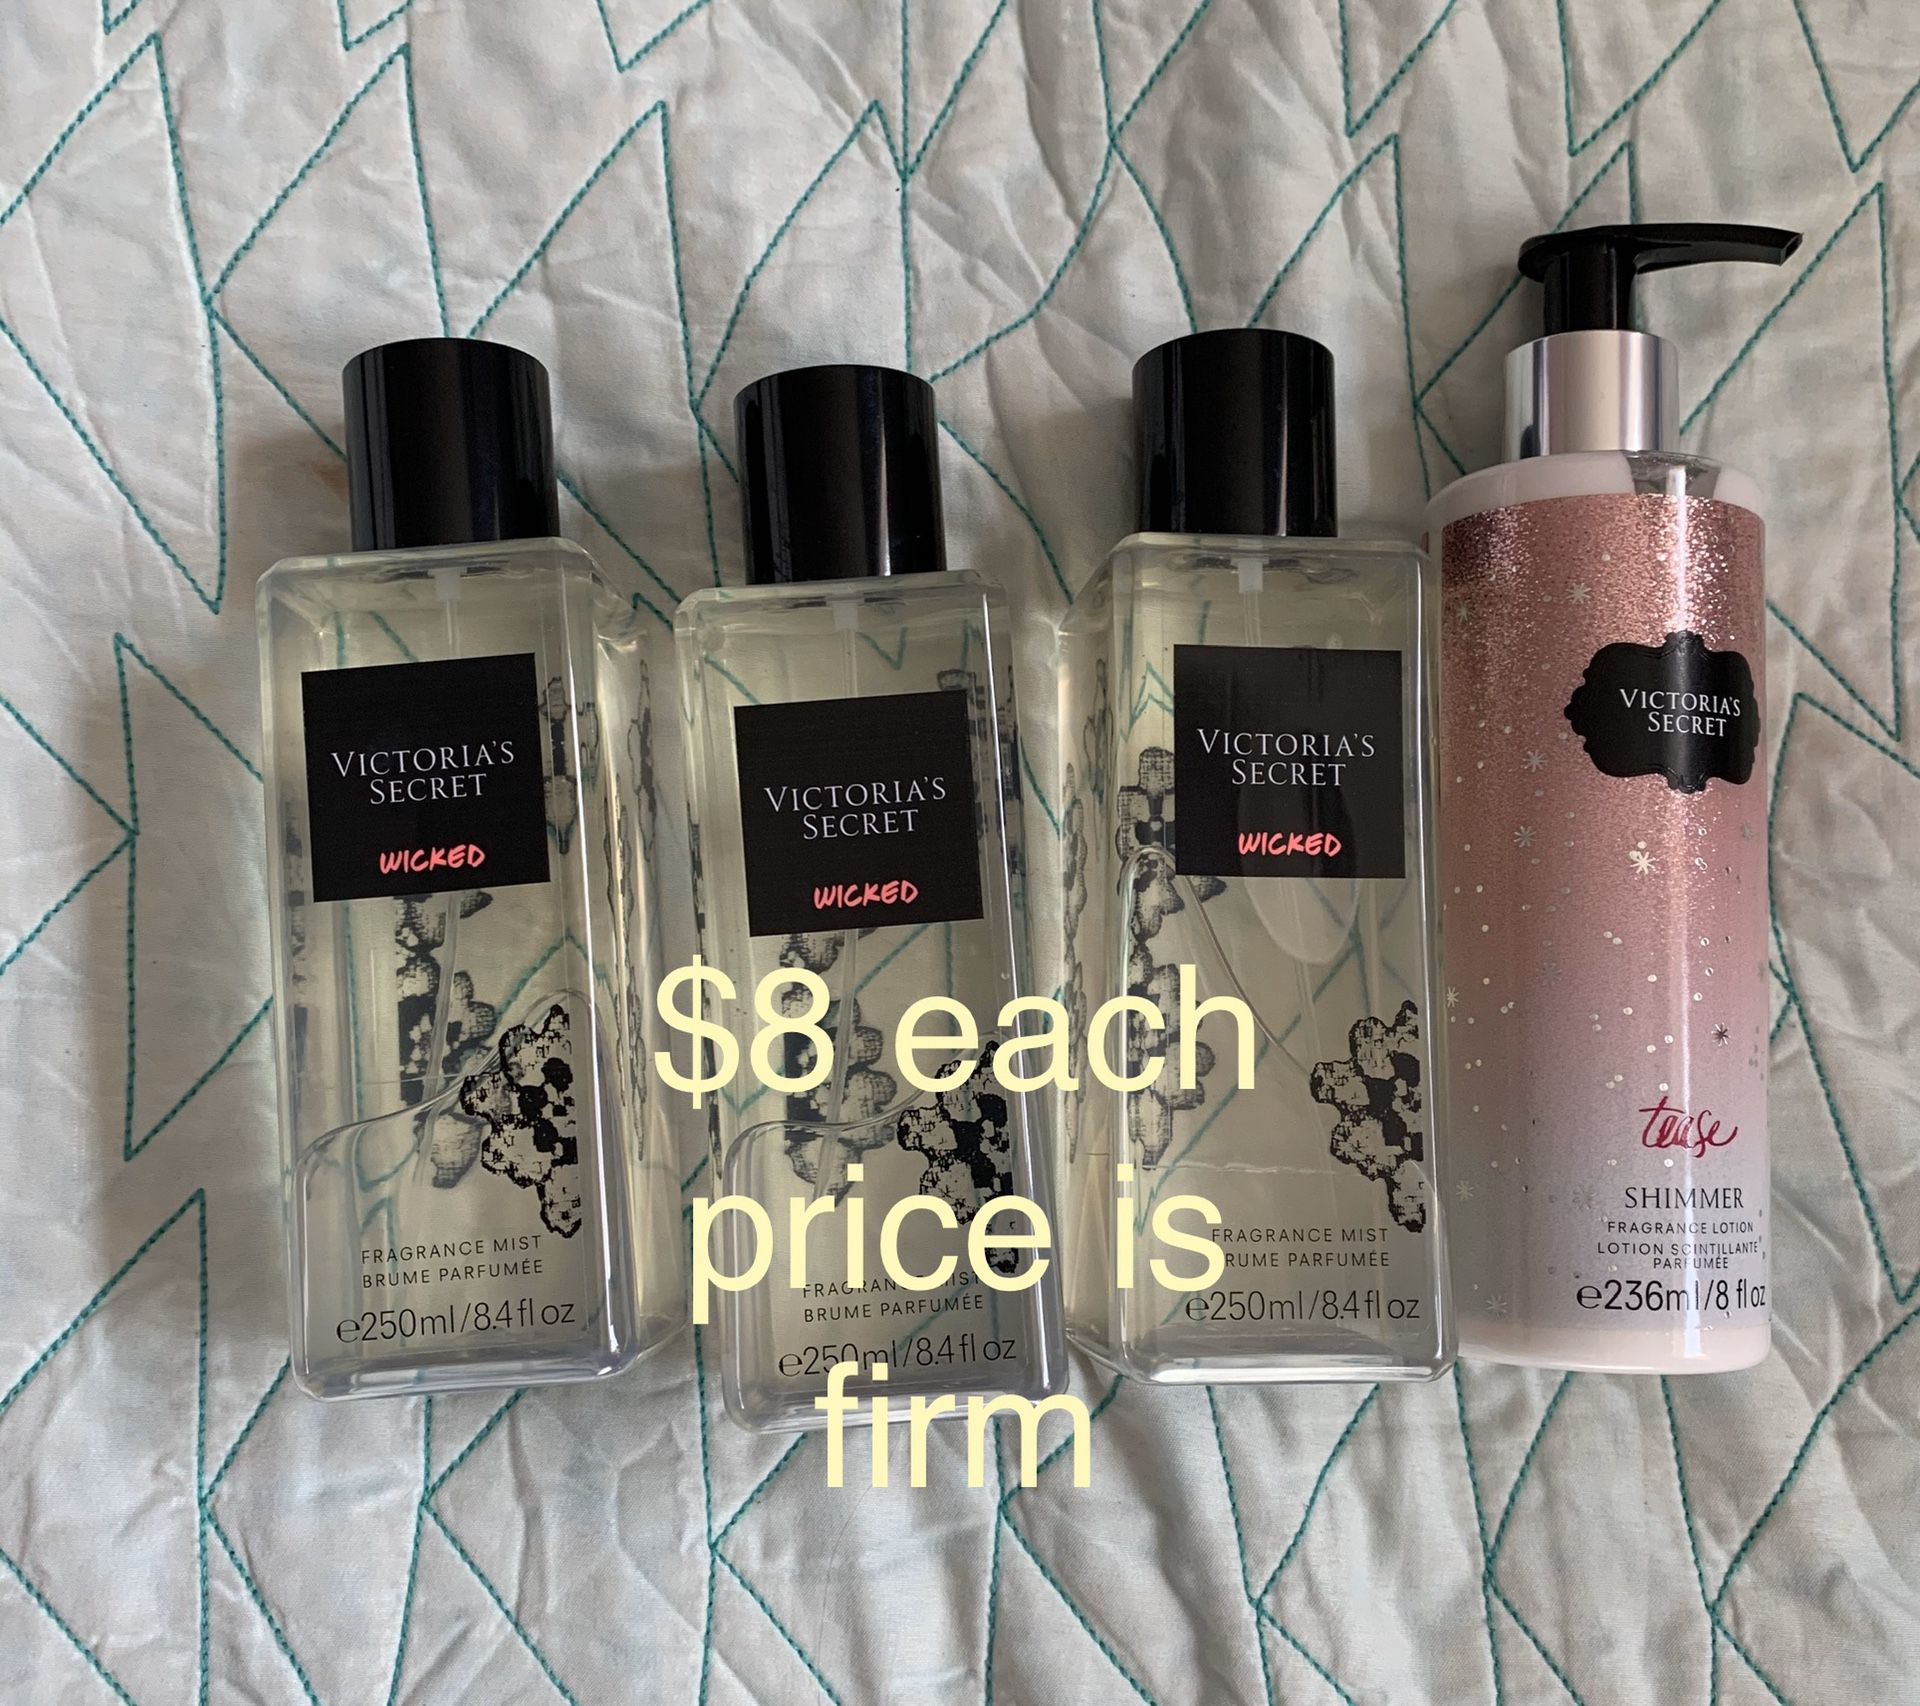 Victoria’s Secret wicked mist and tease shimmer lotion